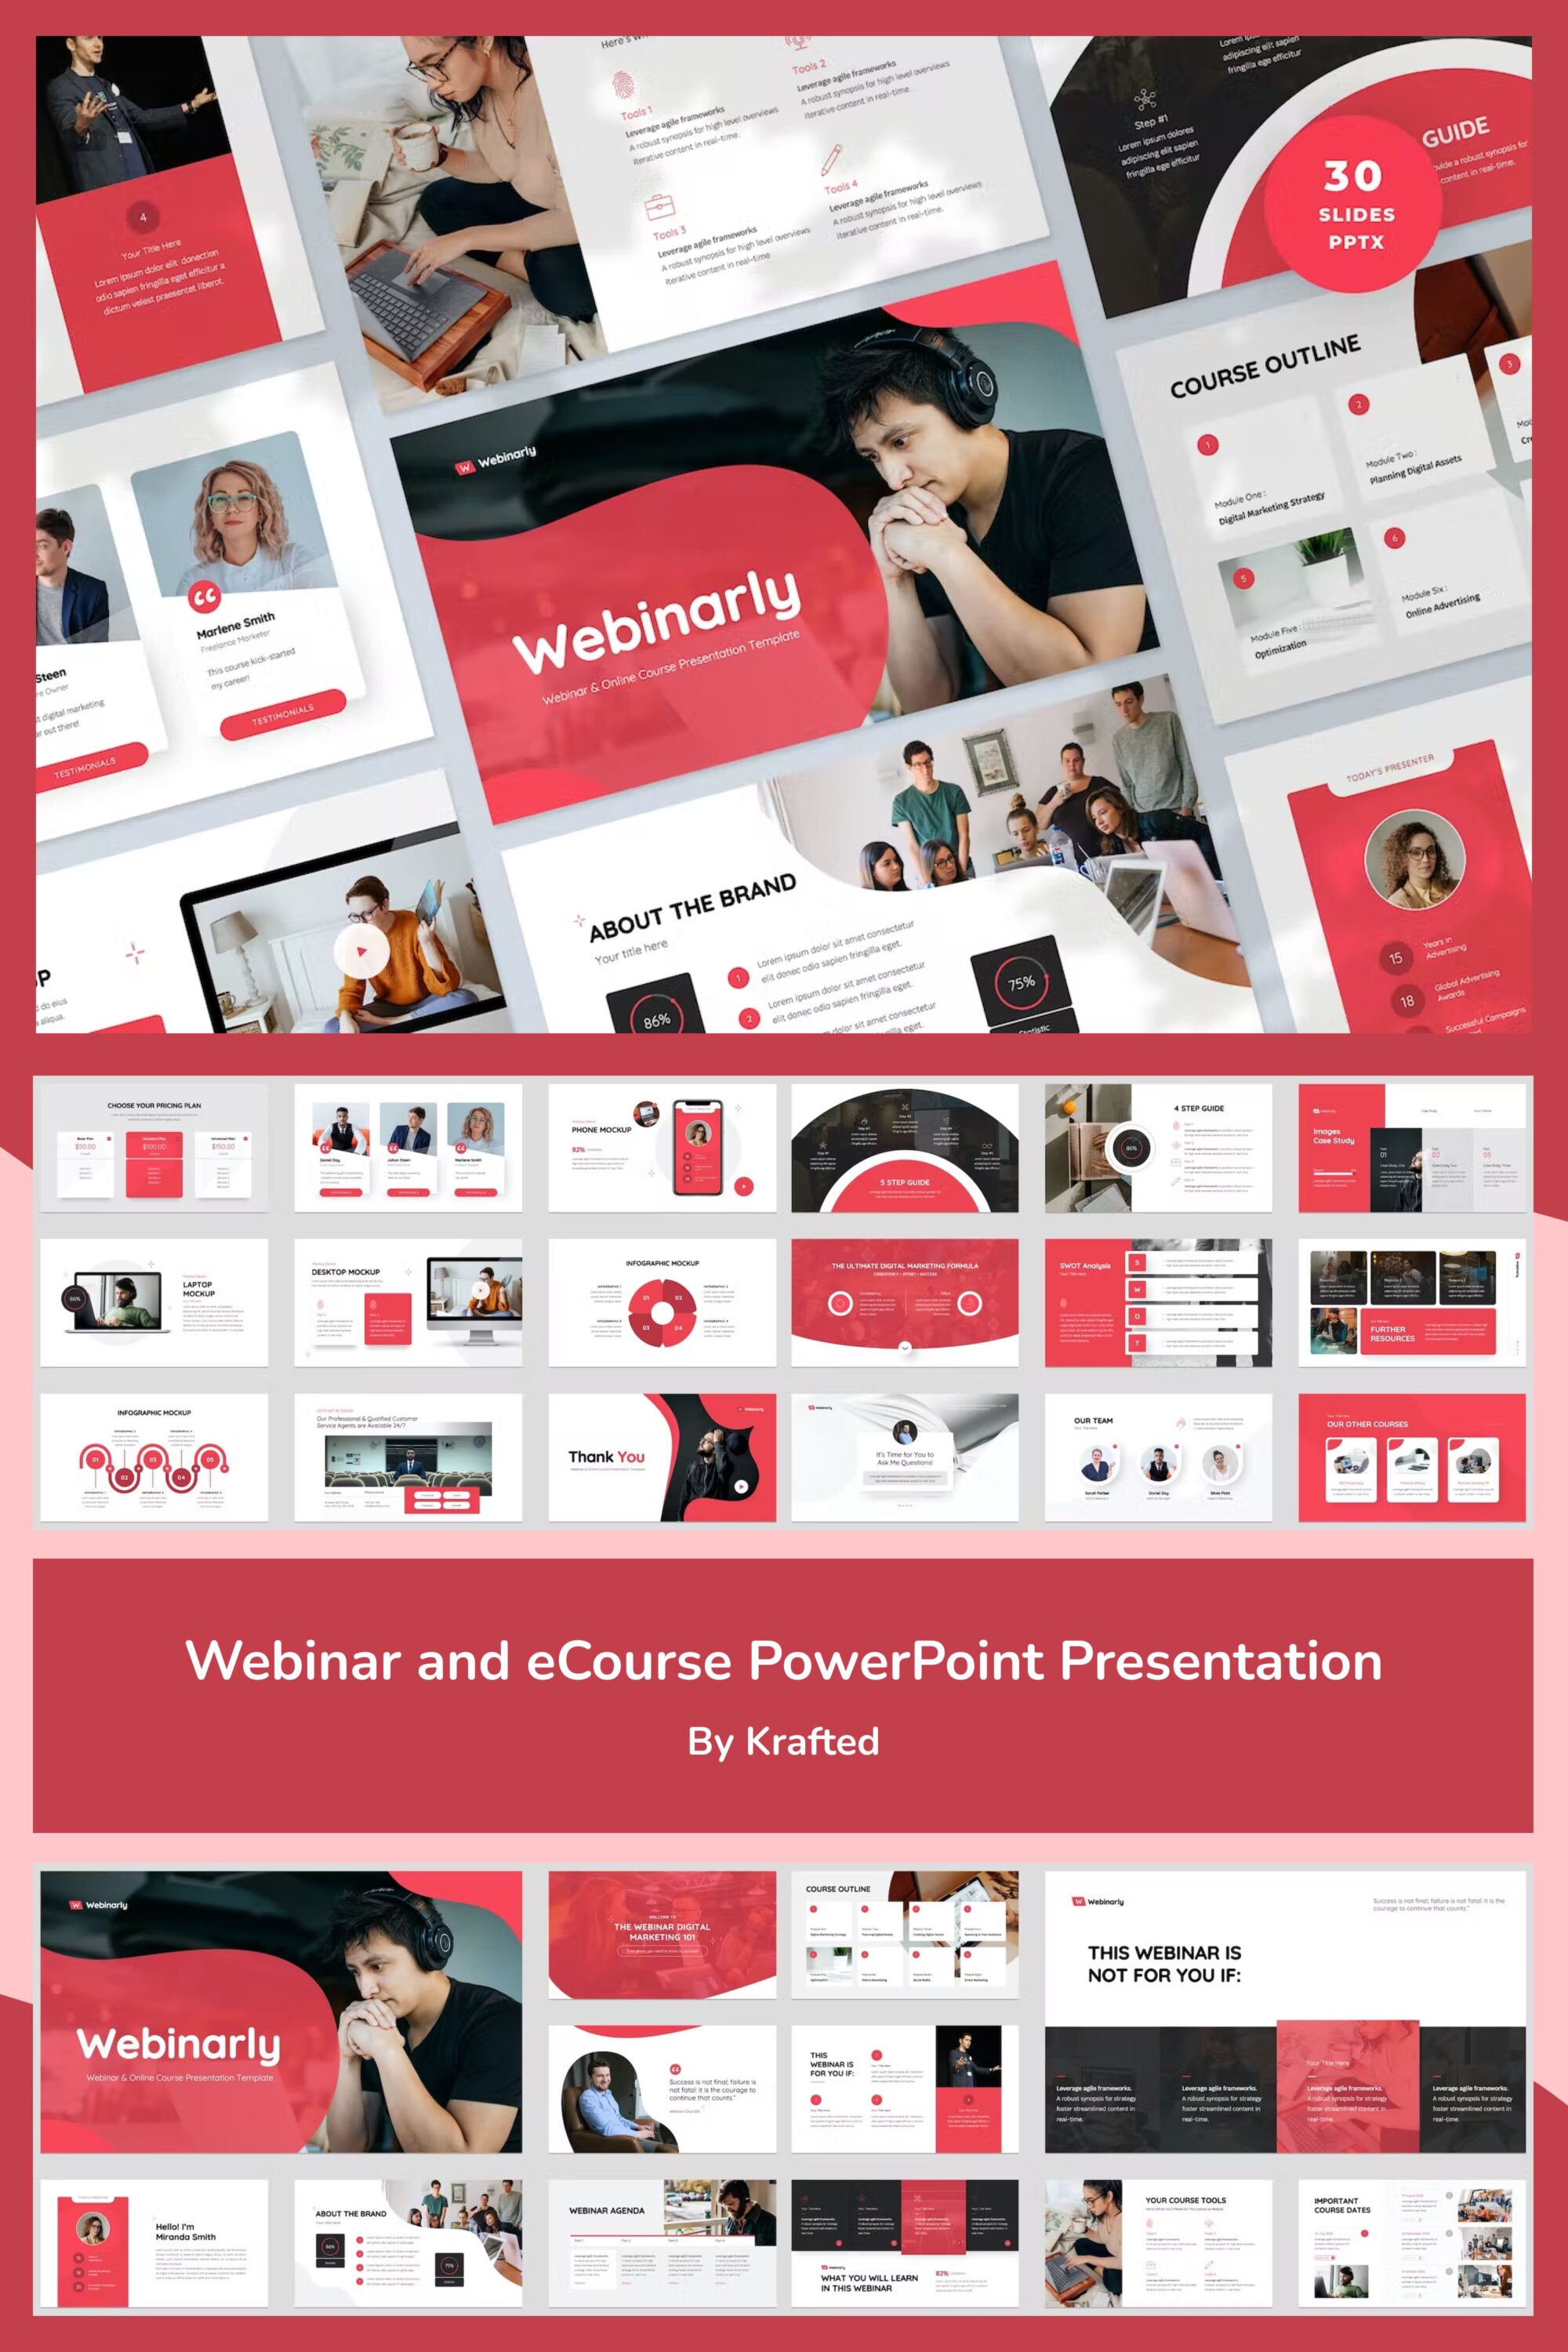 Webinar and eCourse PowerPoint Presentation - pinterest image preview.